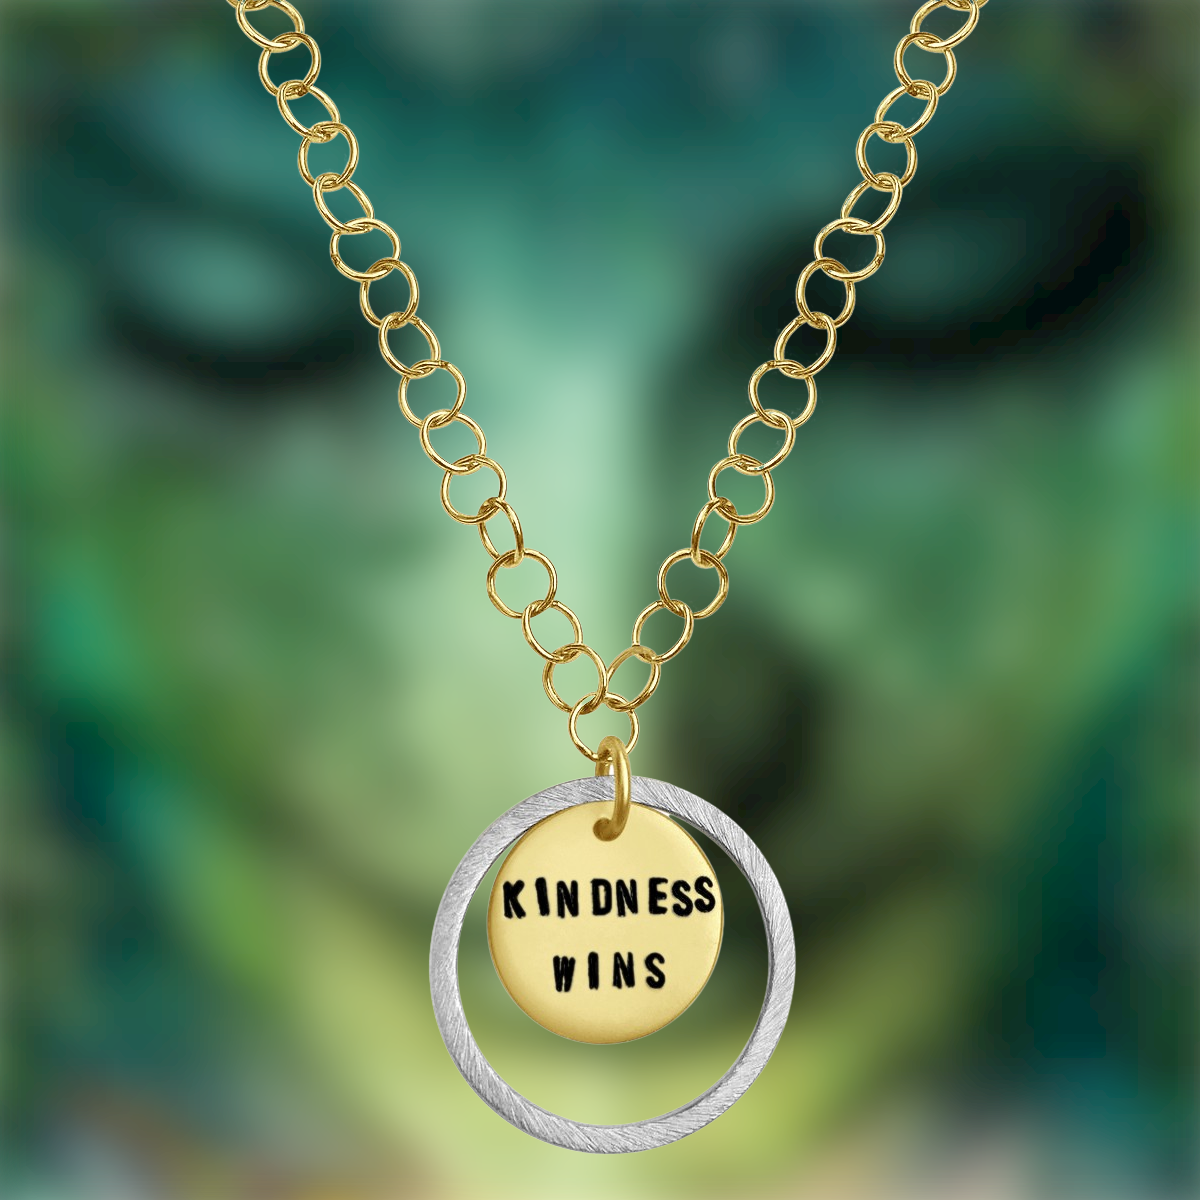 Kindness is a Strength Necklace - Kindness Wins Jewelry